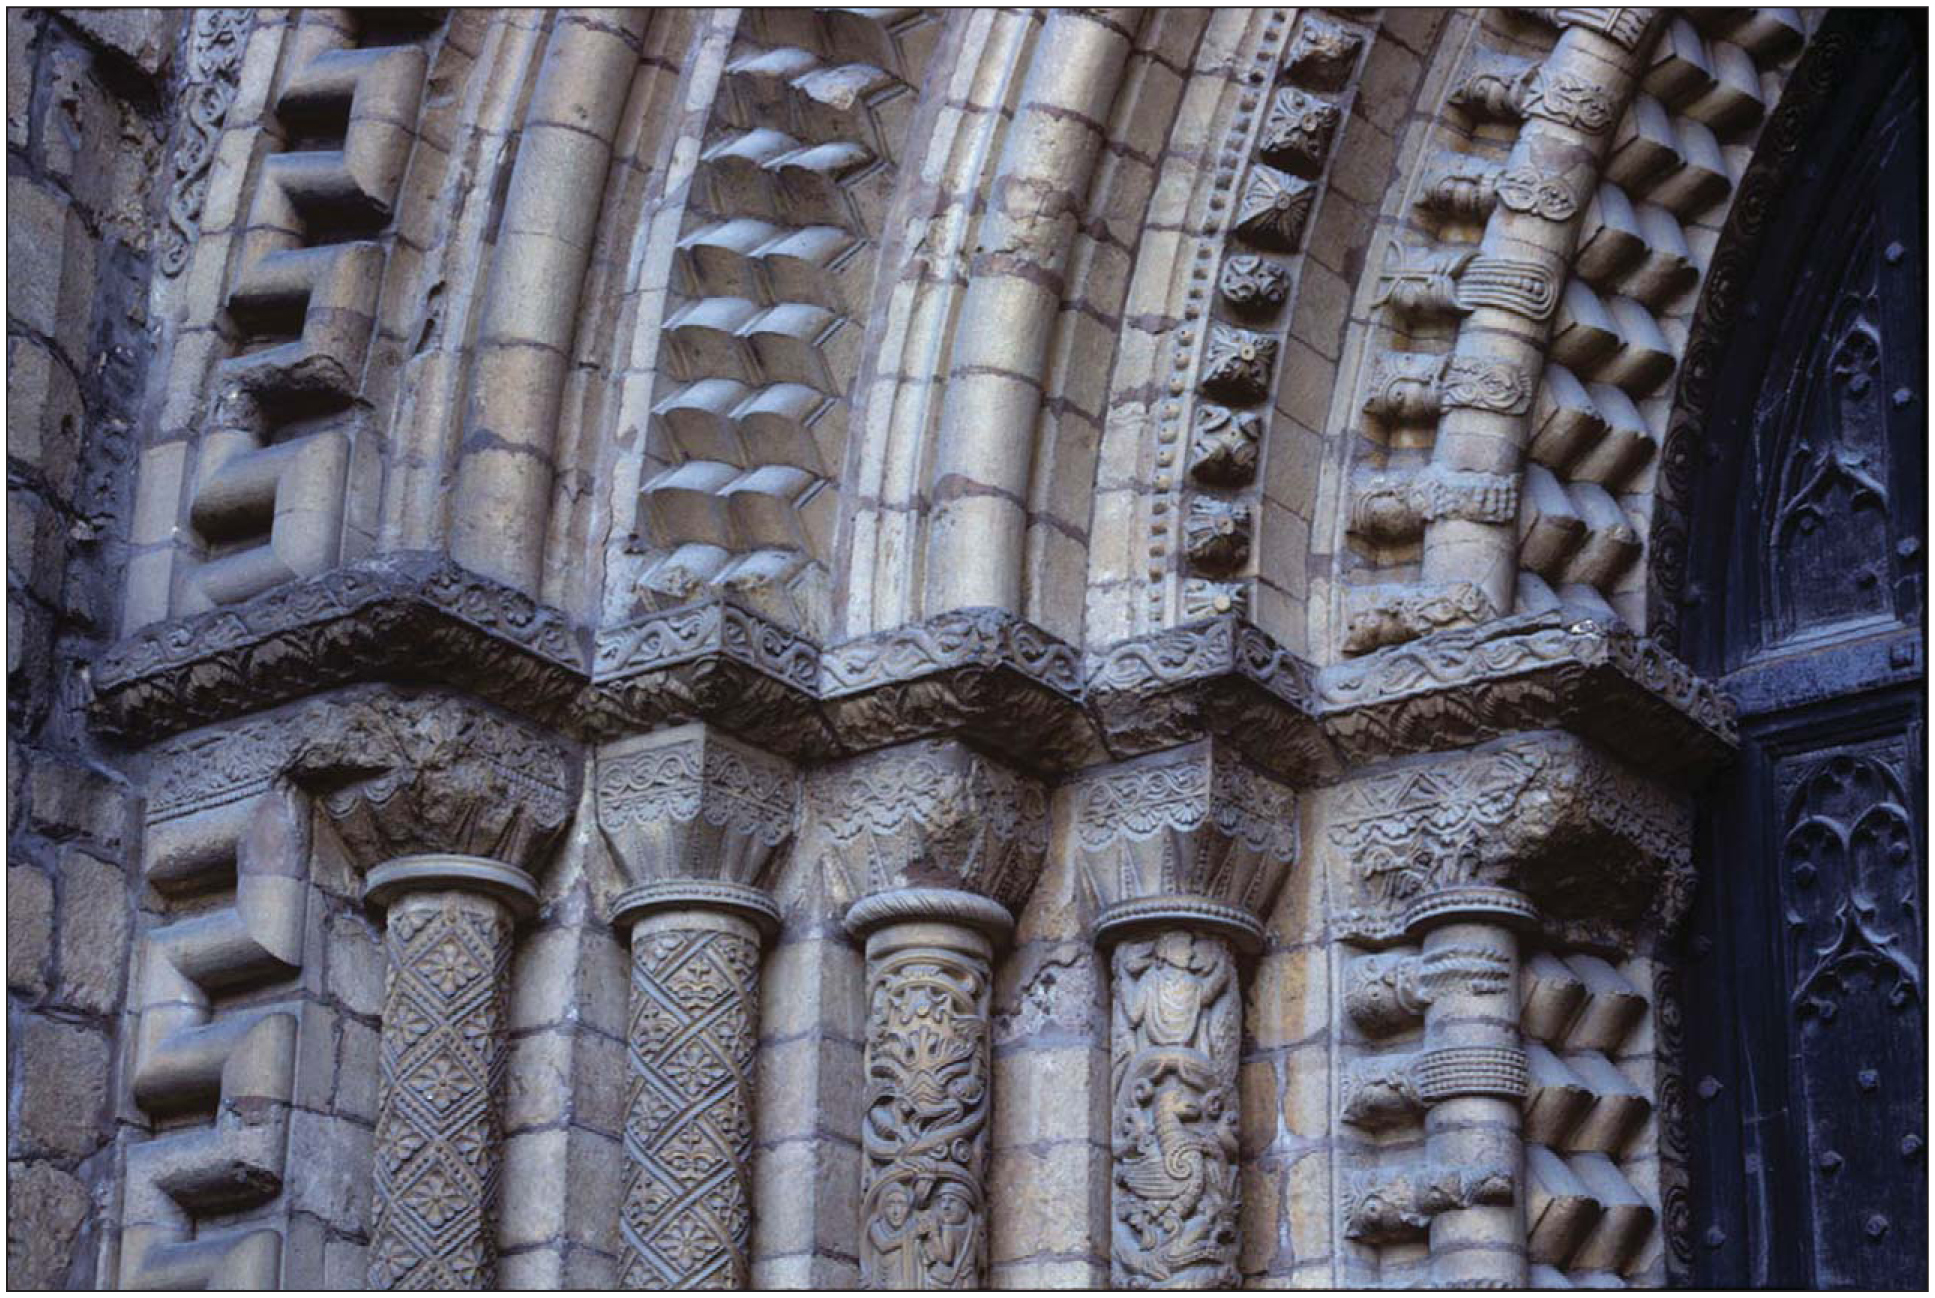 Was Nidaros Cathedral built from stone extracted in a large underground  Medieval quarry?